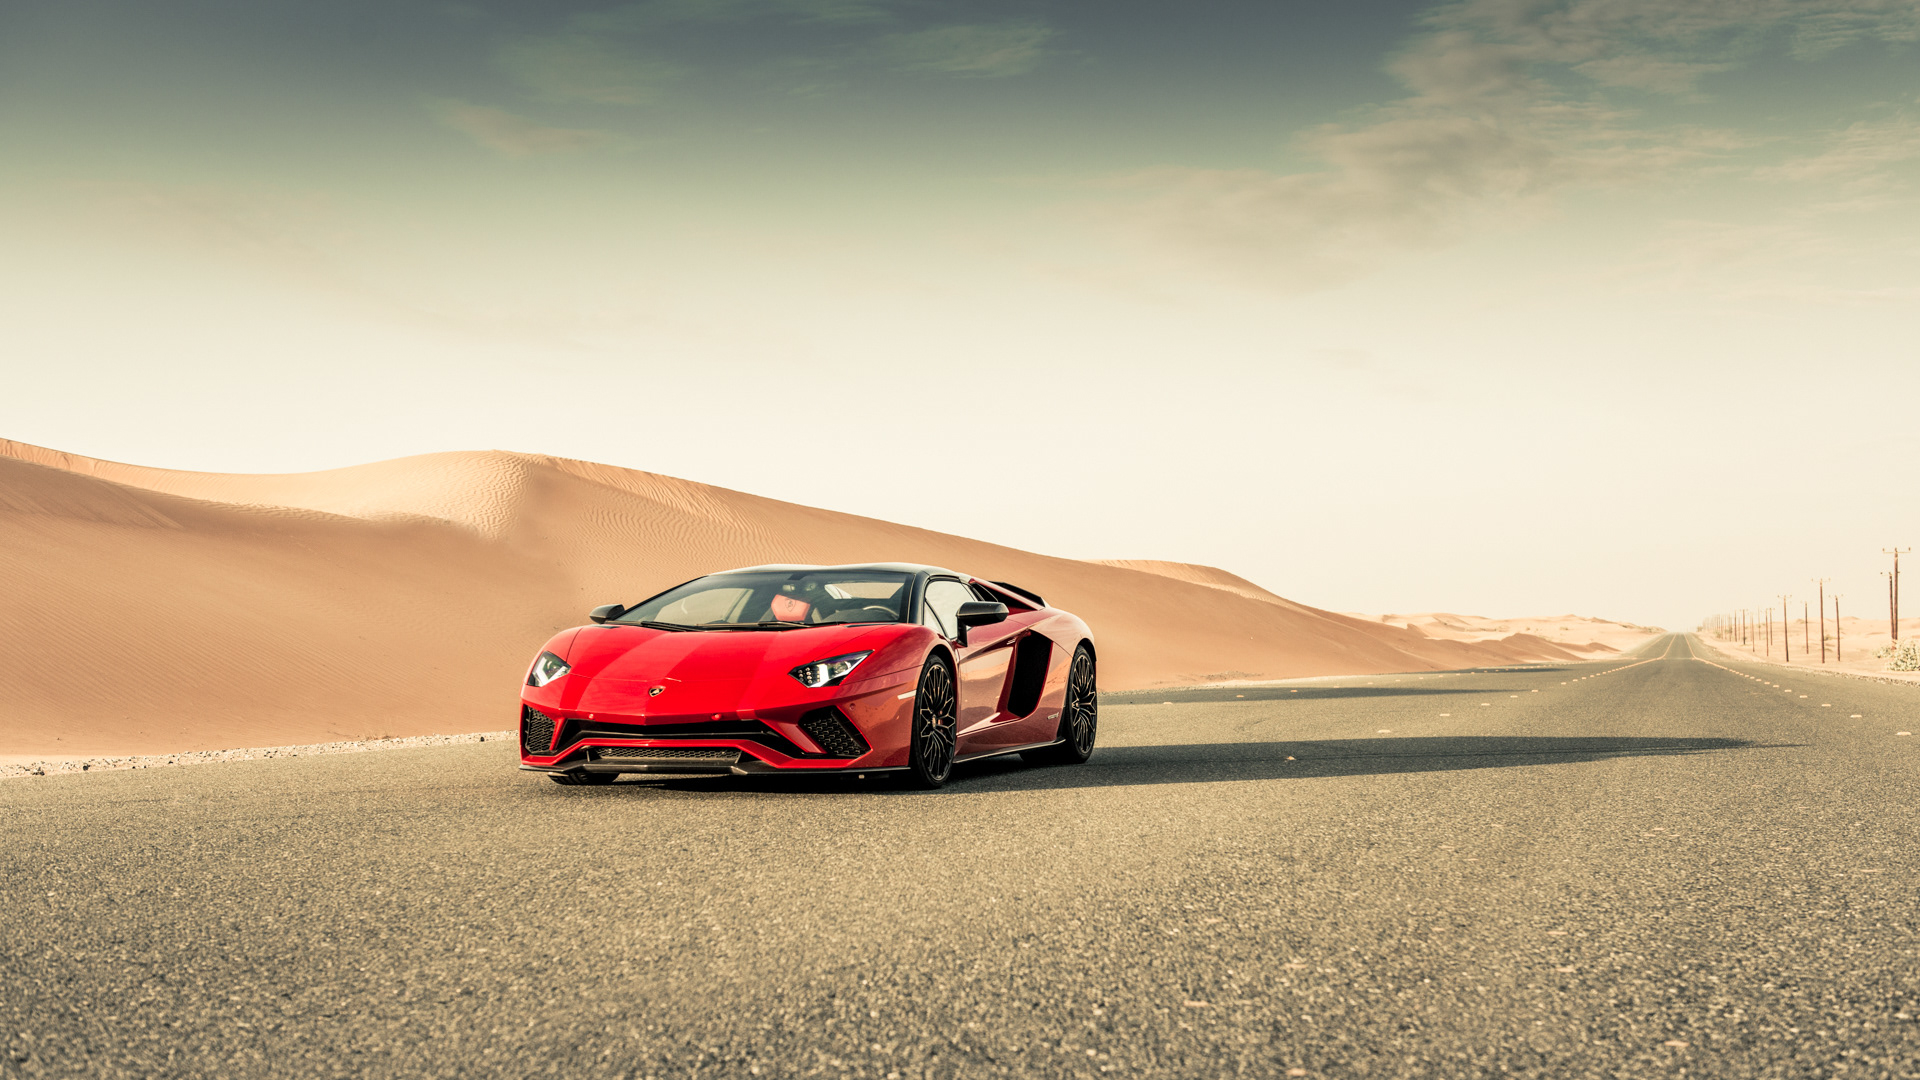 1920x10802019410 Lamborghini Aventador S 1920x10802019410 Resolution  Wallpaper, HD Cars 4K Wallpapers, Images, Photos and Background - Wallpapers  Den